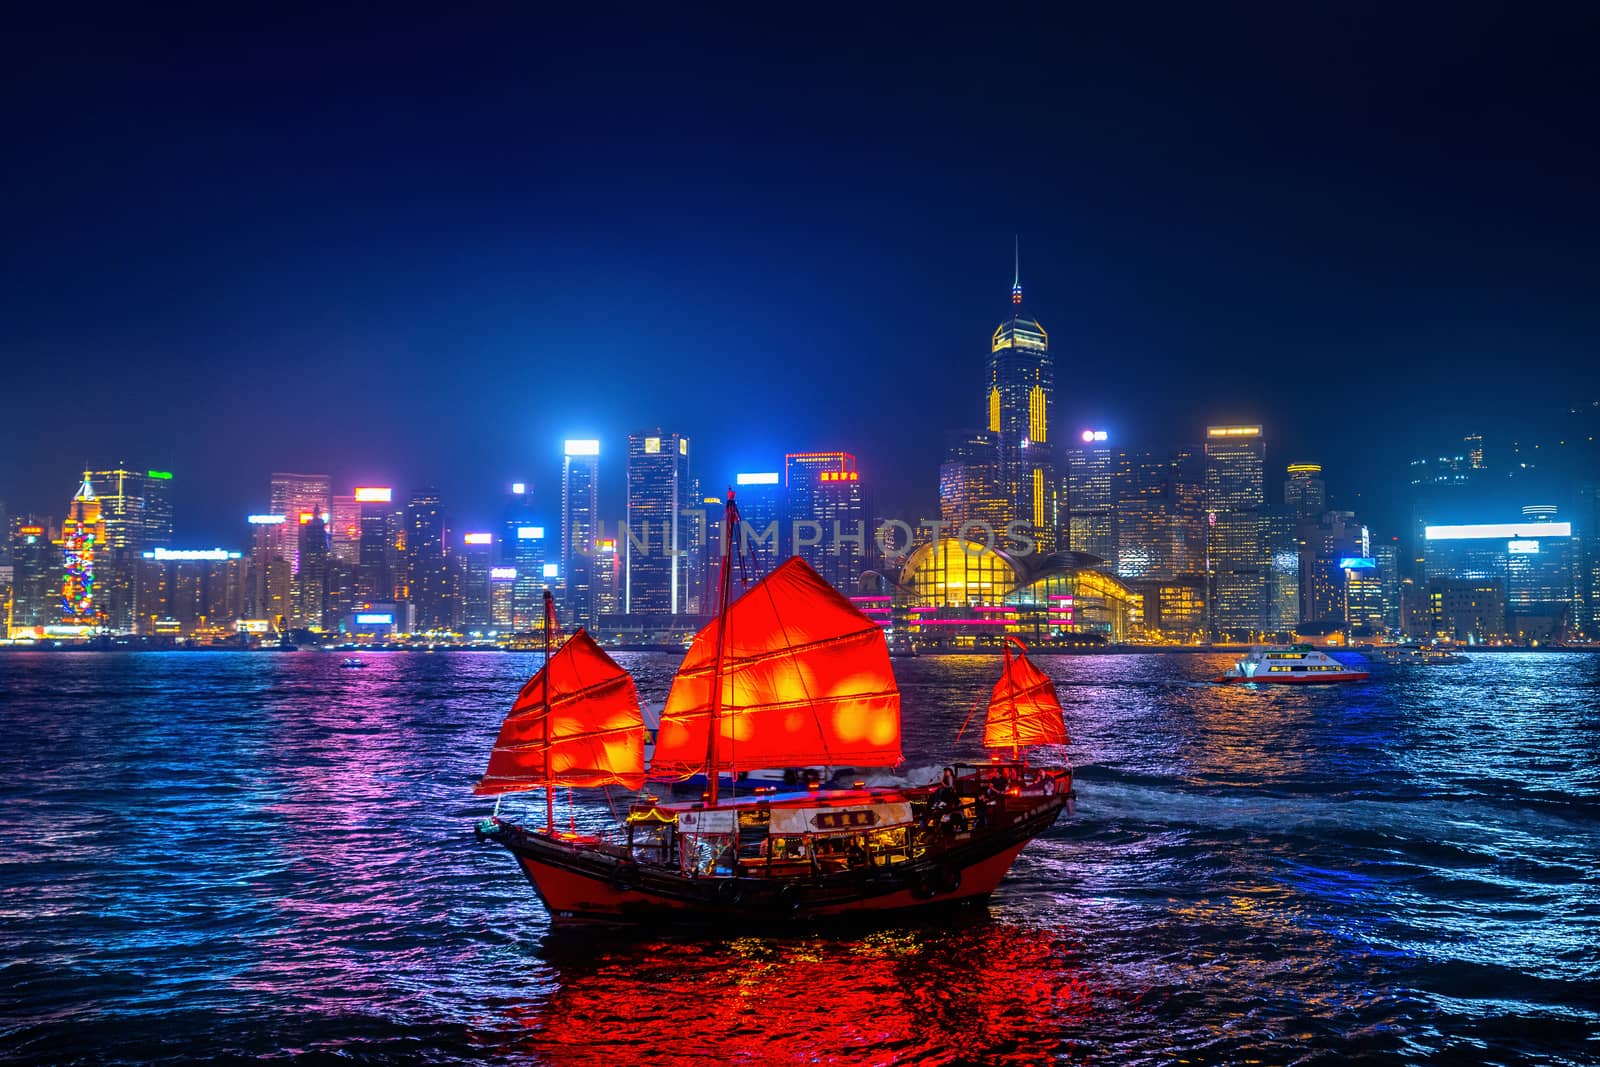 Victoria Harbour with junk ship at night in Hong Kong. by gutarphotoghaphy